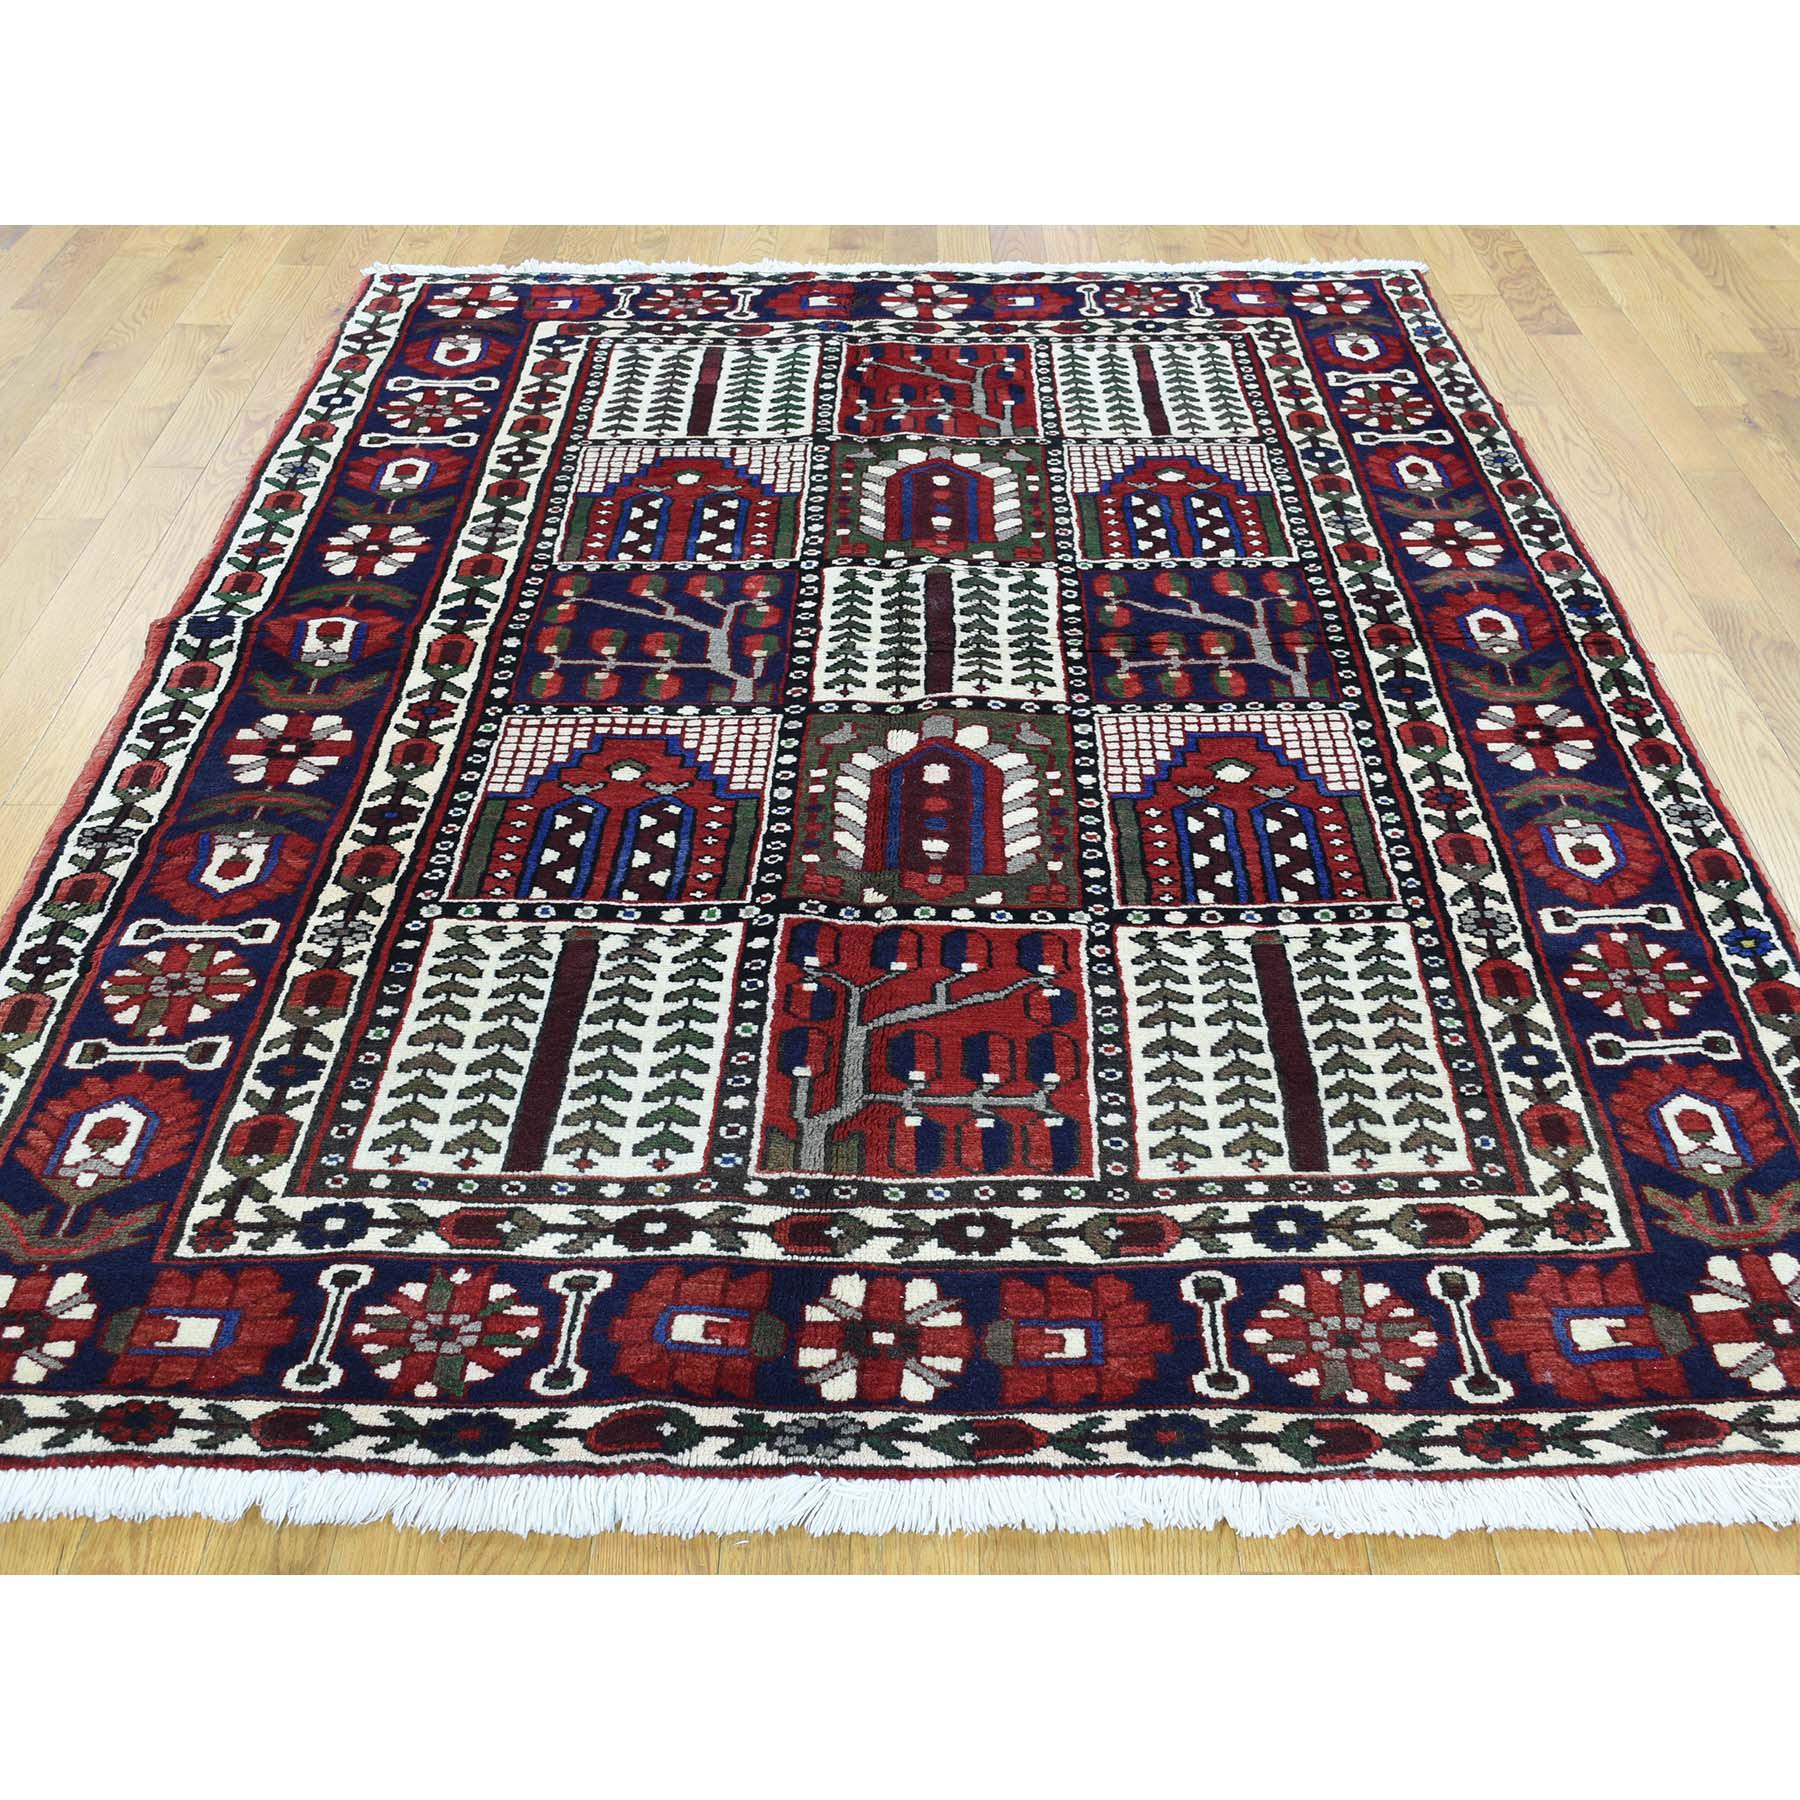 This fabulous Hand-Knotted carpet has been created and designed for extra strength and durability. This rug has been handcrafted for weeks in the traditional method that is used to make Rugs. This is truly a one-of-kind piece. 

Exact Rug Size in